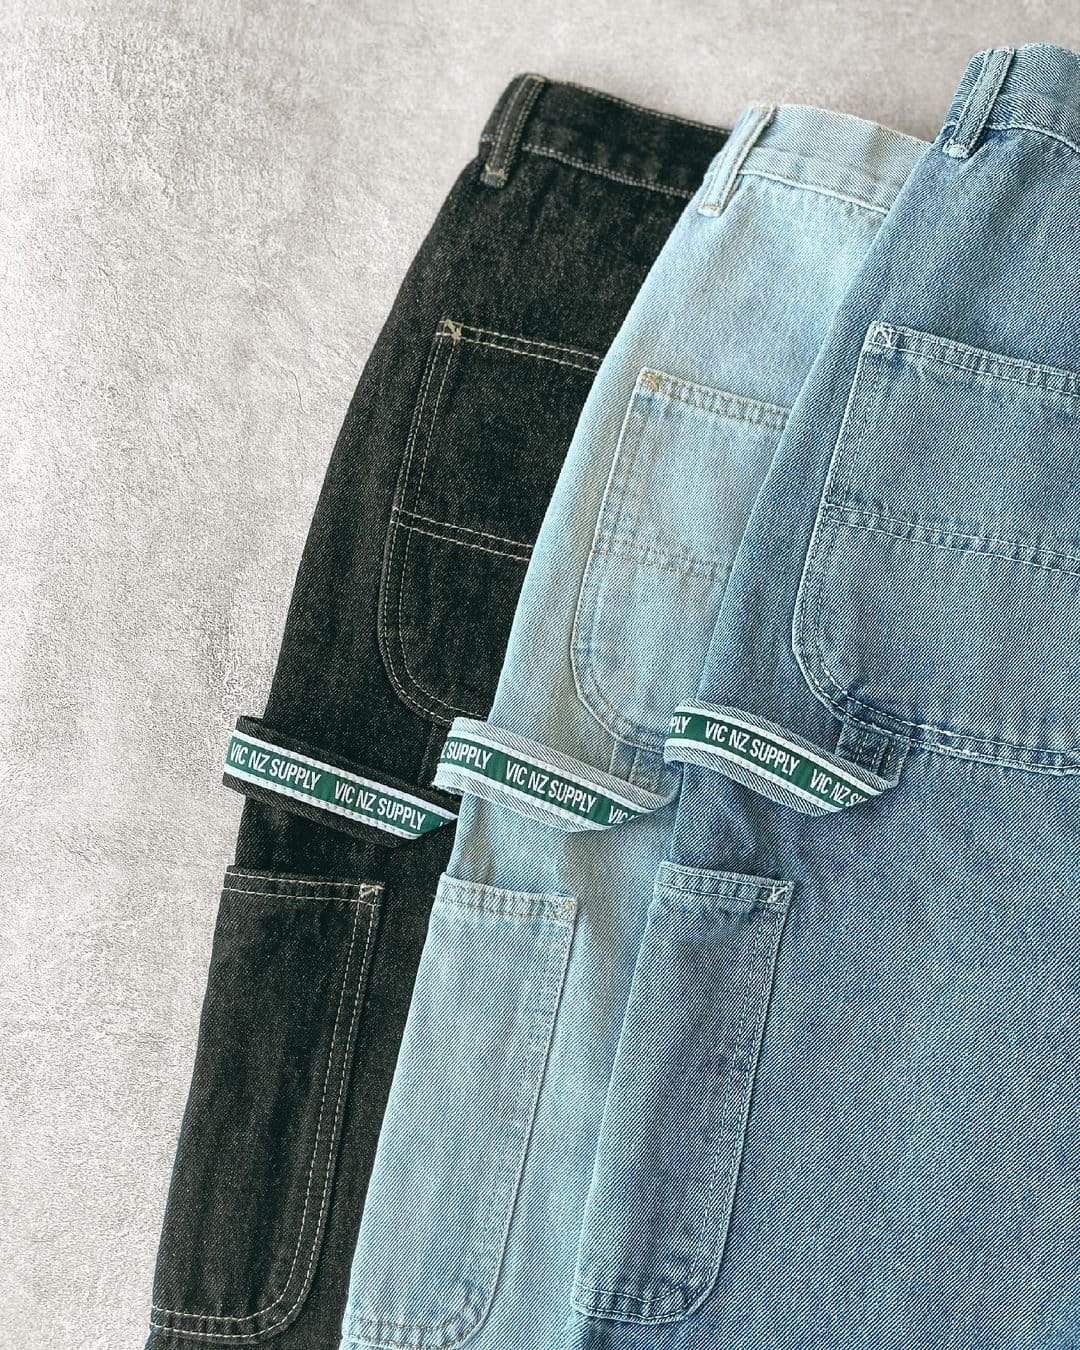 Premium quality carpenter jeans by New Zealand skate and streetwear clothing label VIC Apparel. Ultra baggy fit. Featuring utility pockets, a traditional hammer loop, and triple needle contrast stitching with the blue woven VIC patch on the hammer loop. 90s Classic vintage workwear work pant style.